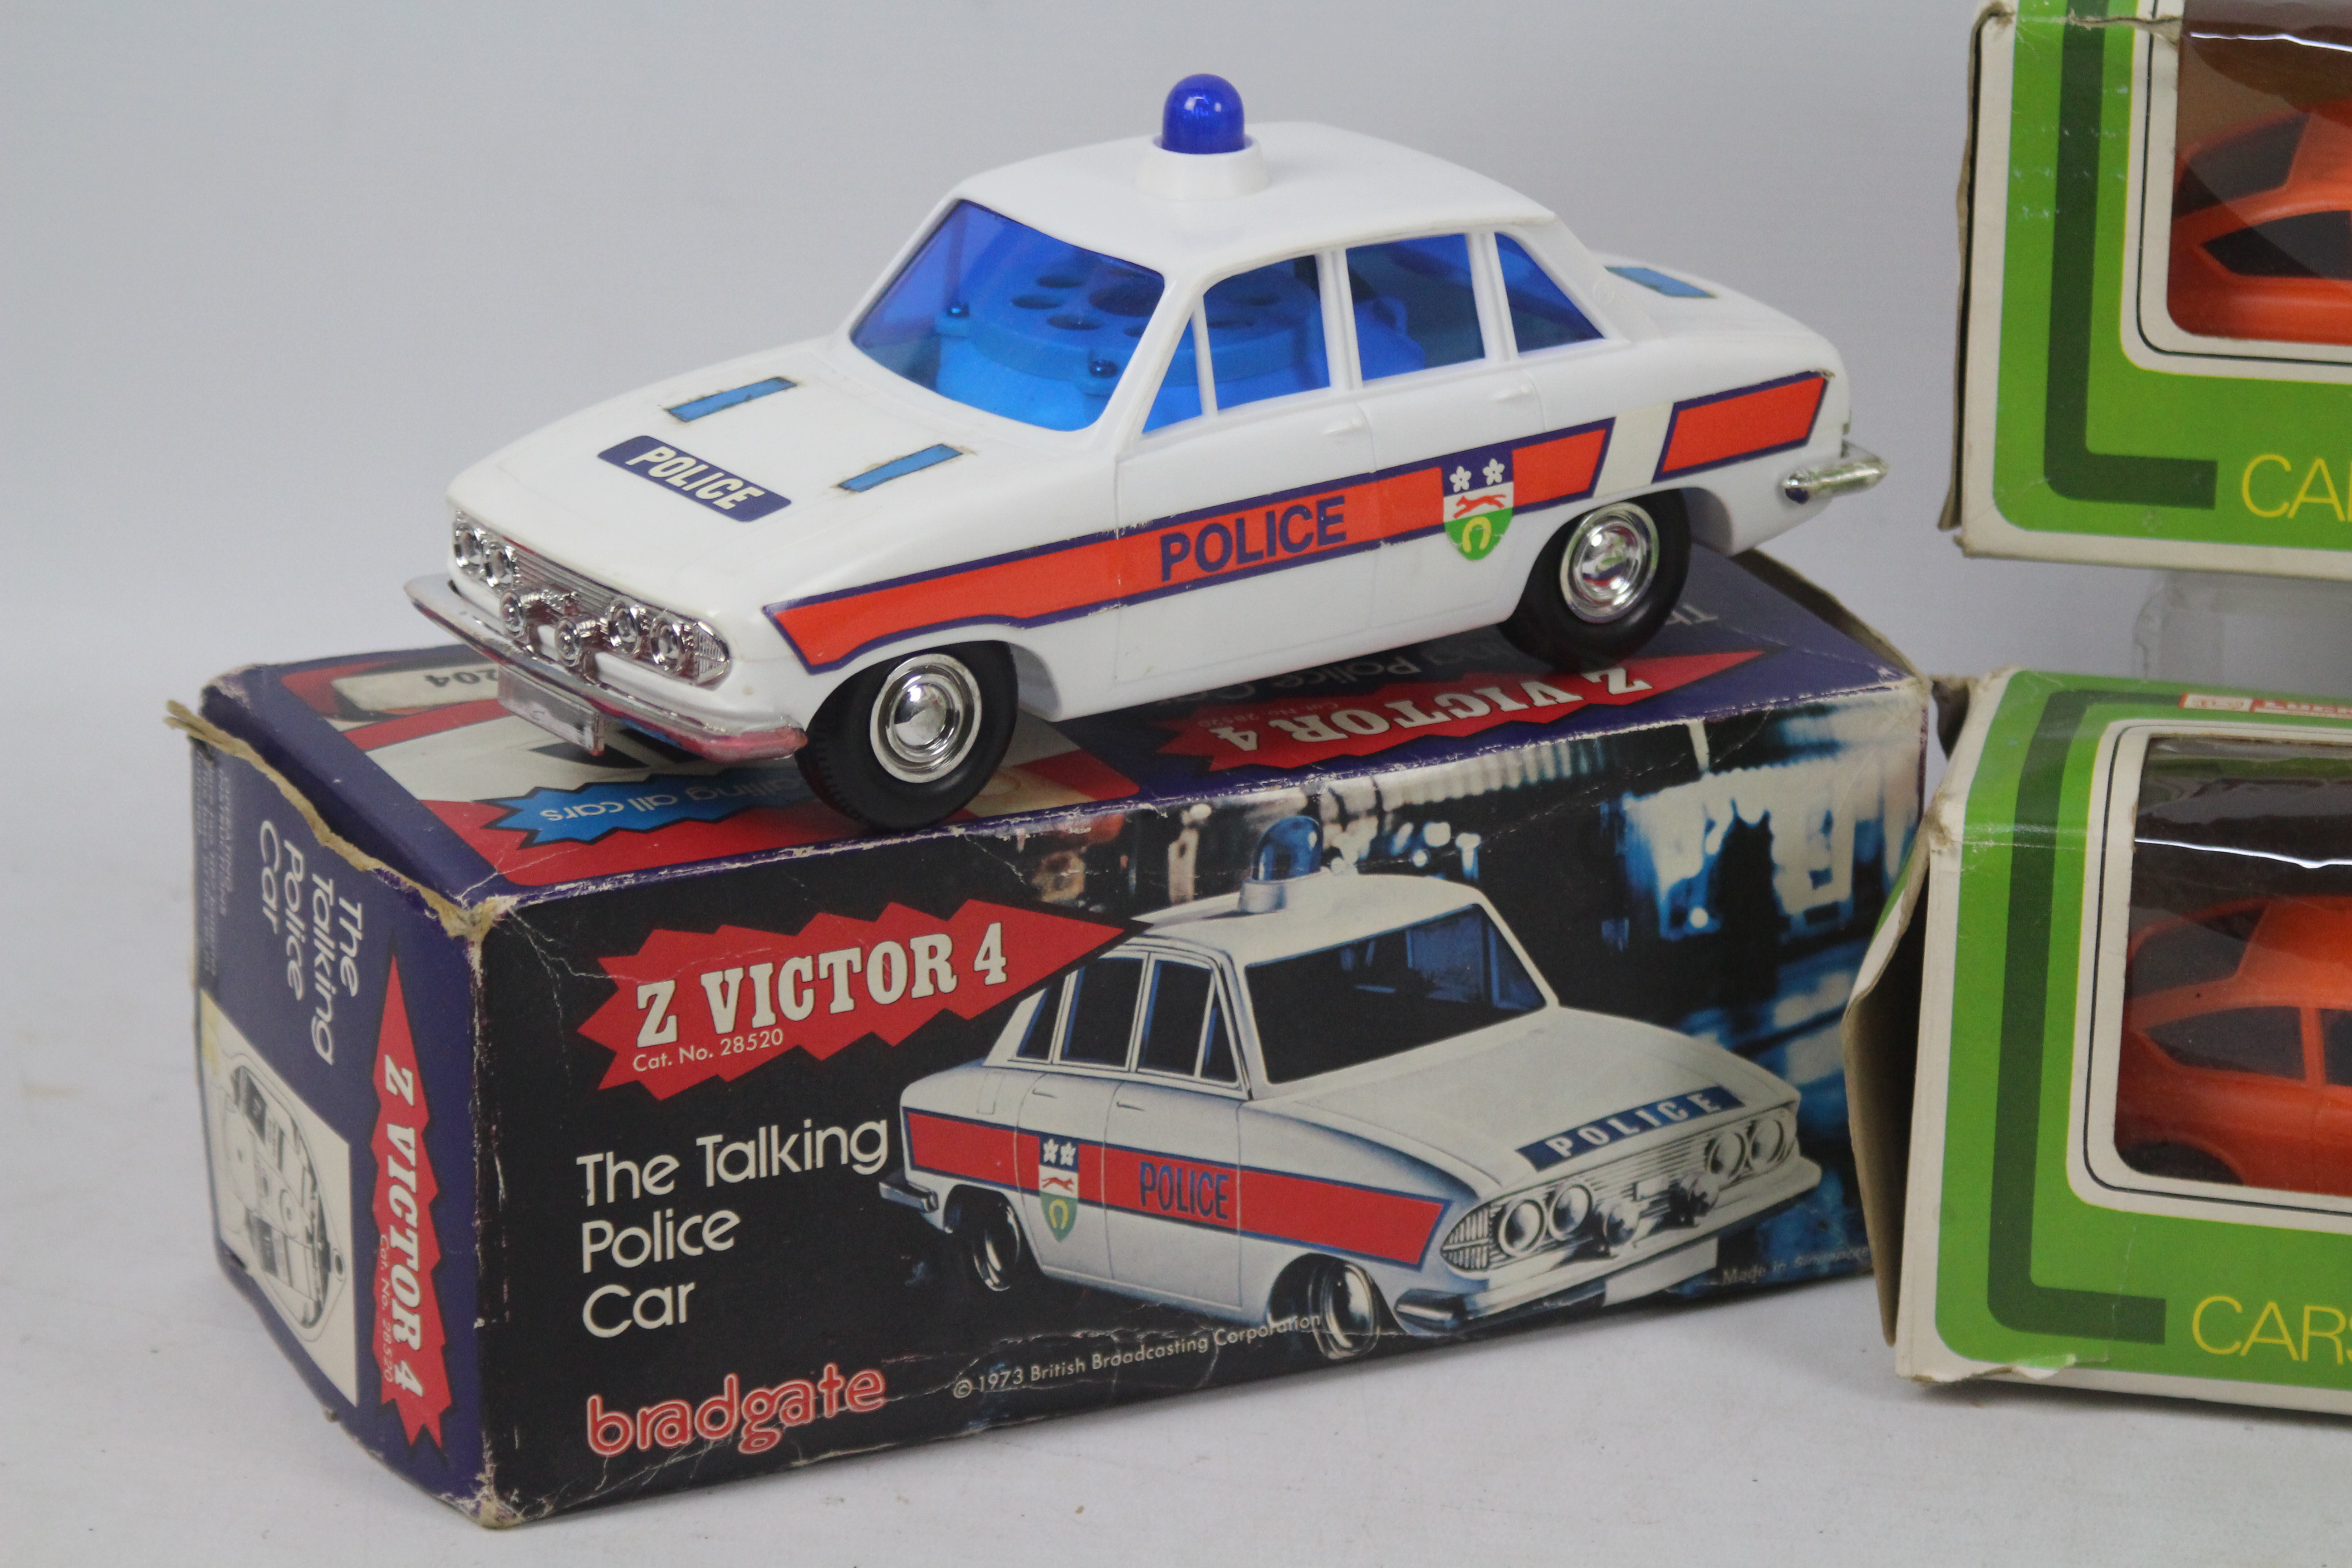 Lucky Toys - NFIC - Bradgate - 4 x boxed models, Z Victor 4 the talking Triumph 2000 Police car, - Image 3 of 5